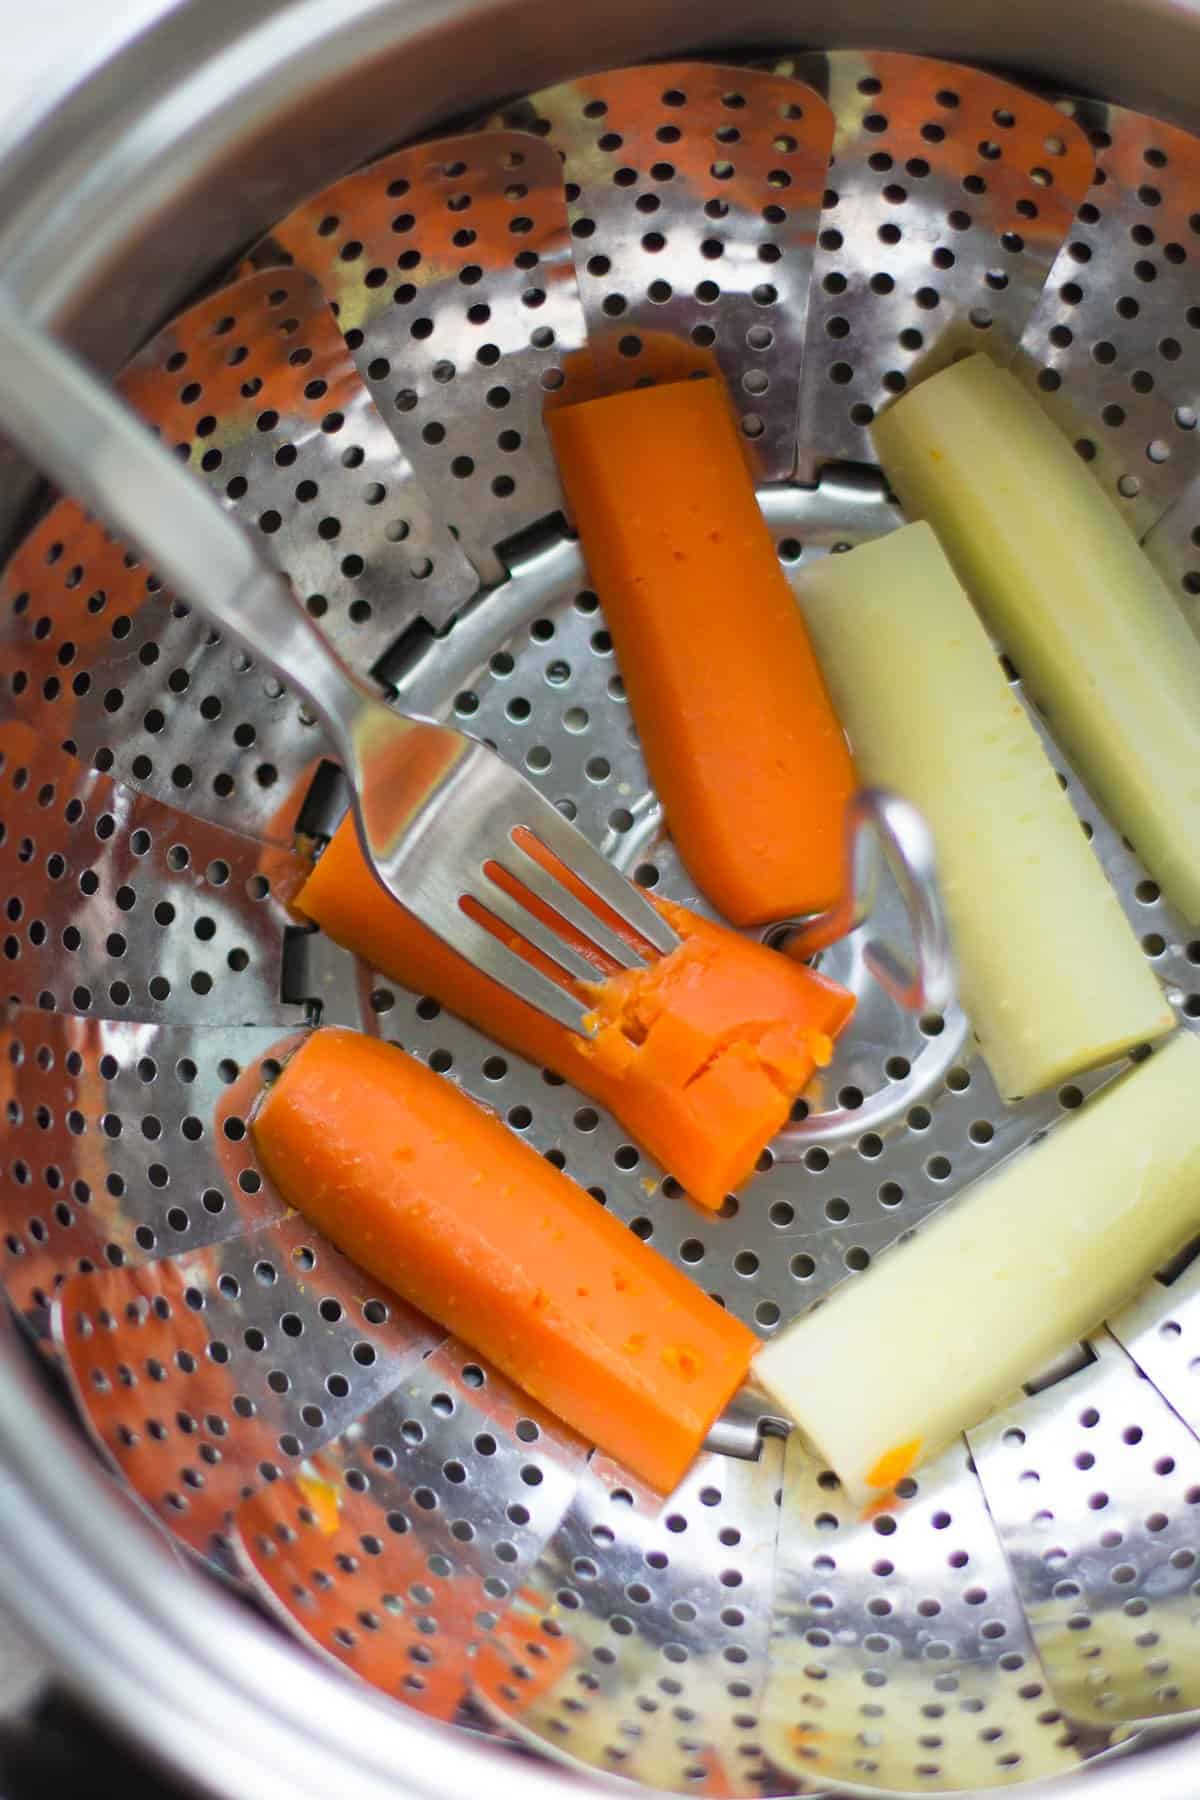 Steamed white and orange carrots in a pot.